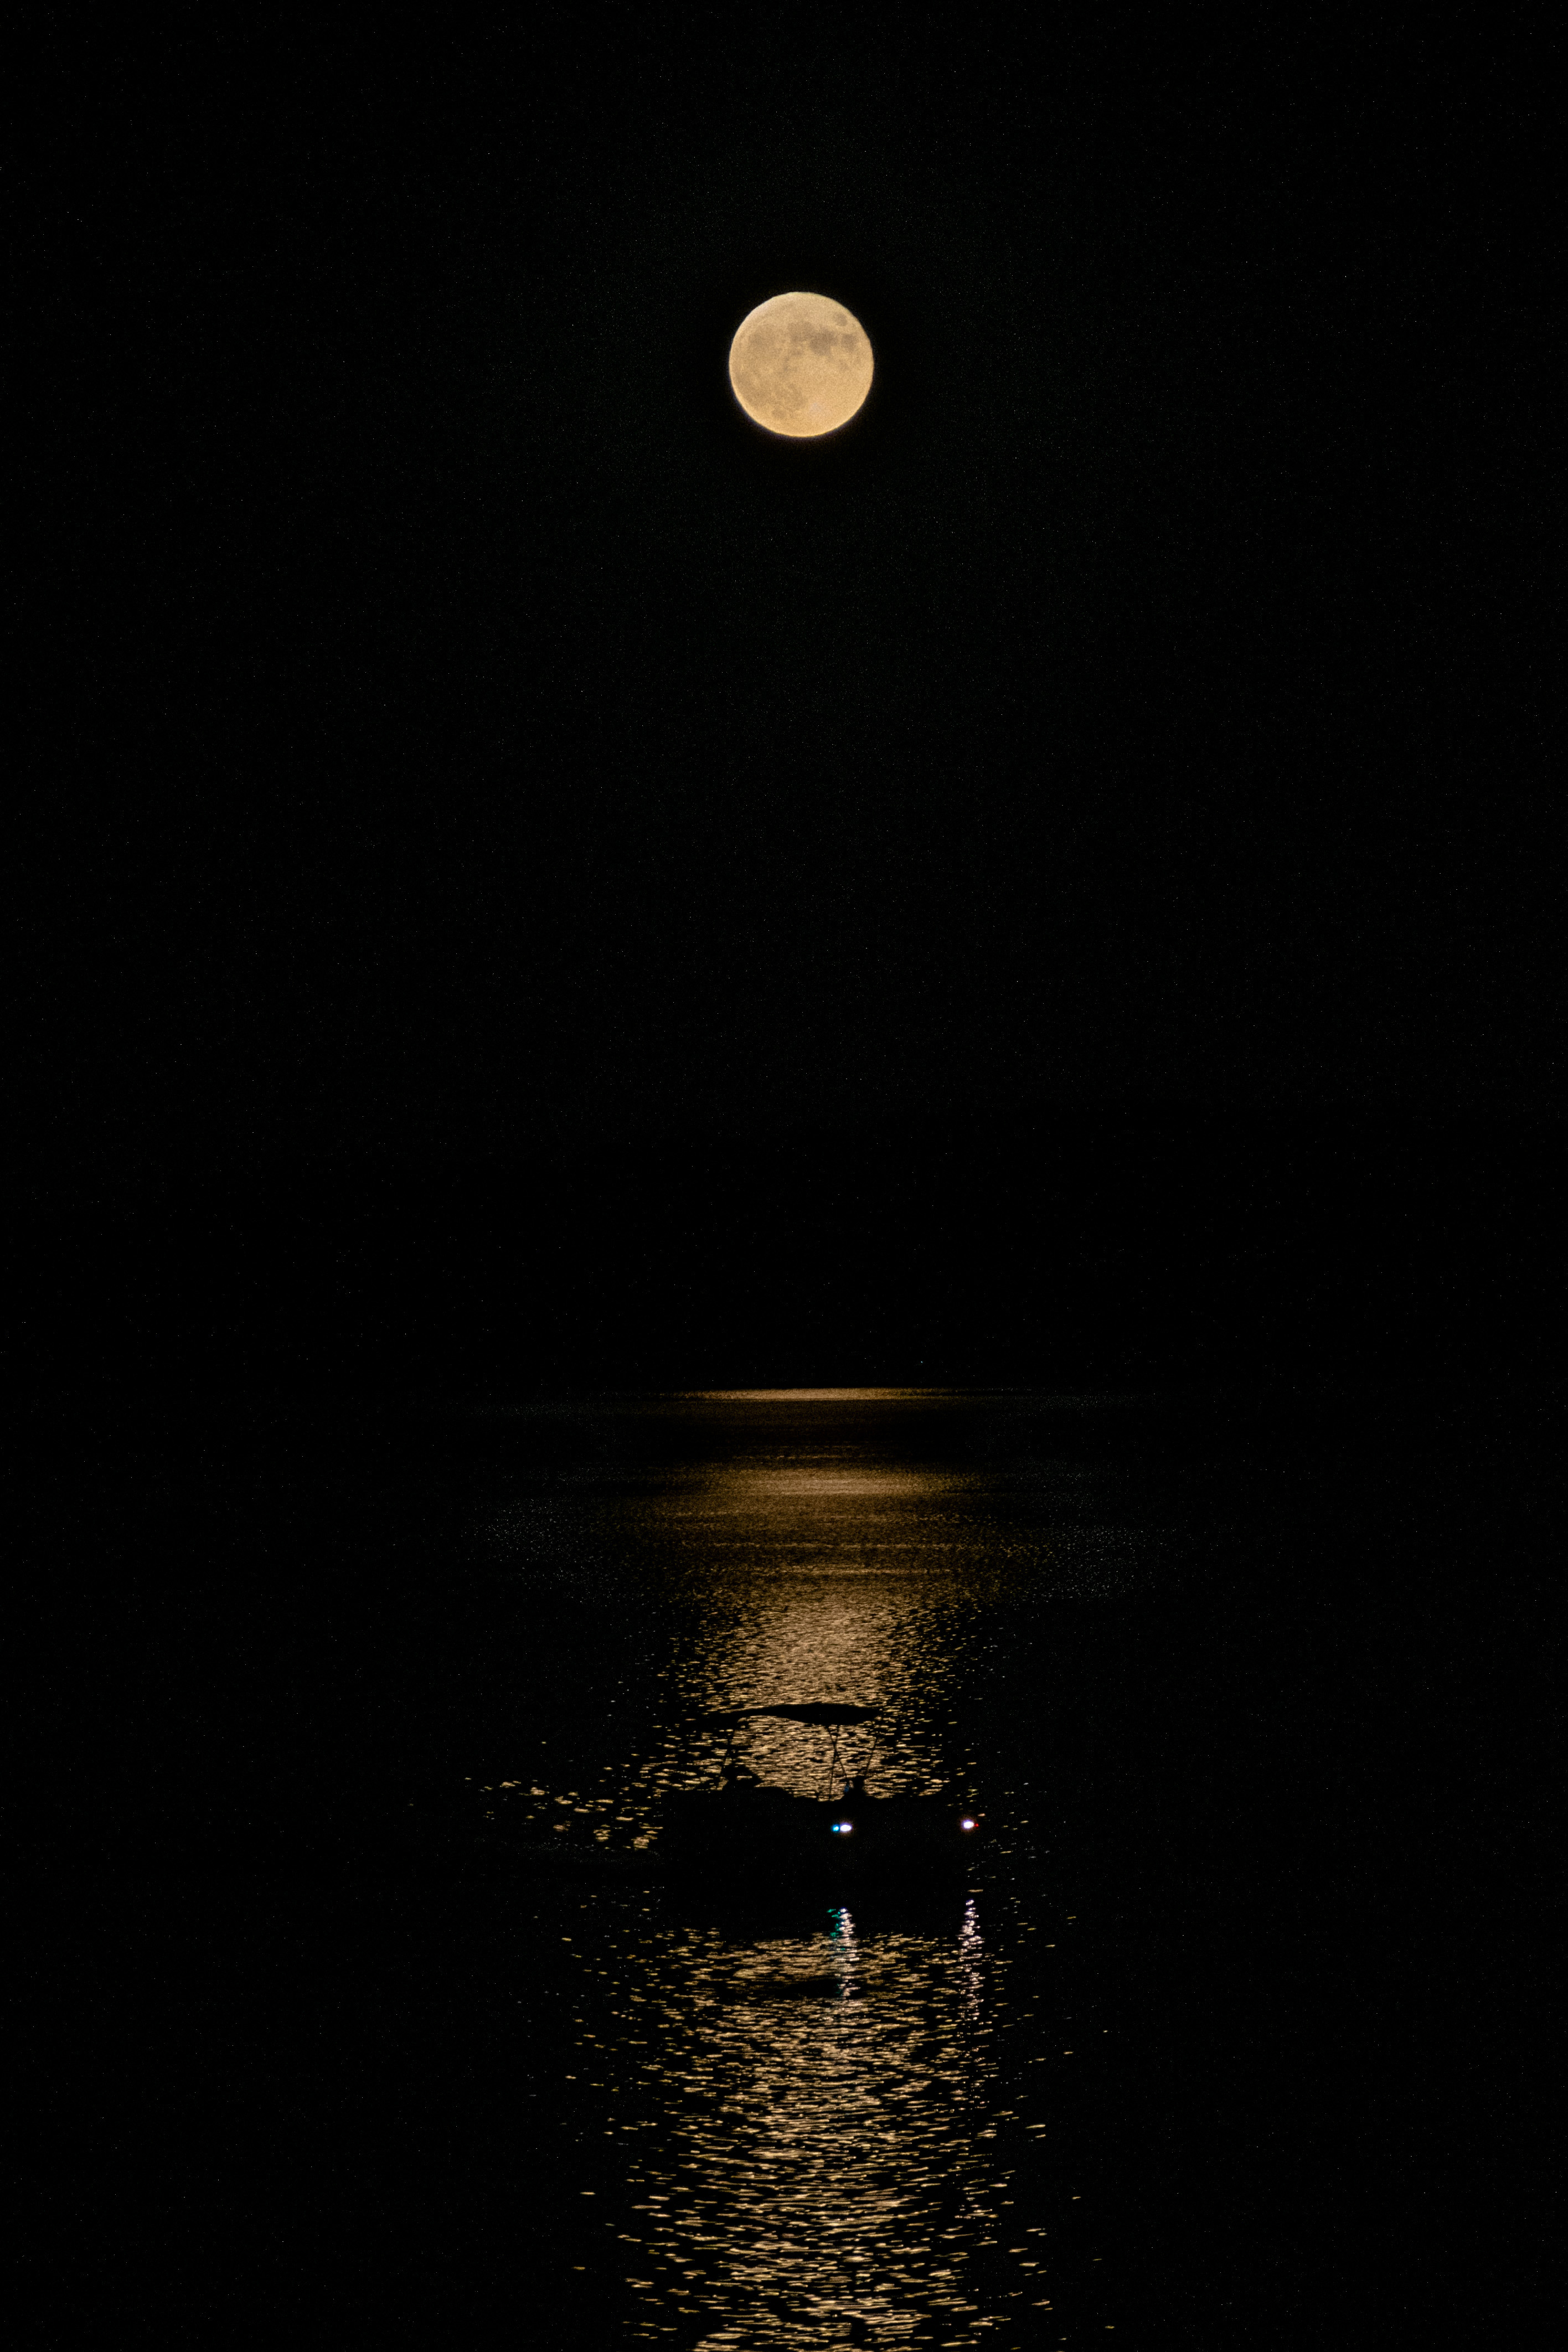 A full moon hangs in a black sky, as a boat passes through its elongated reflection in some water.